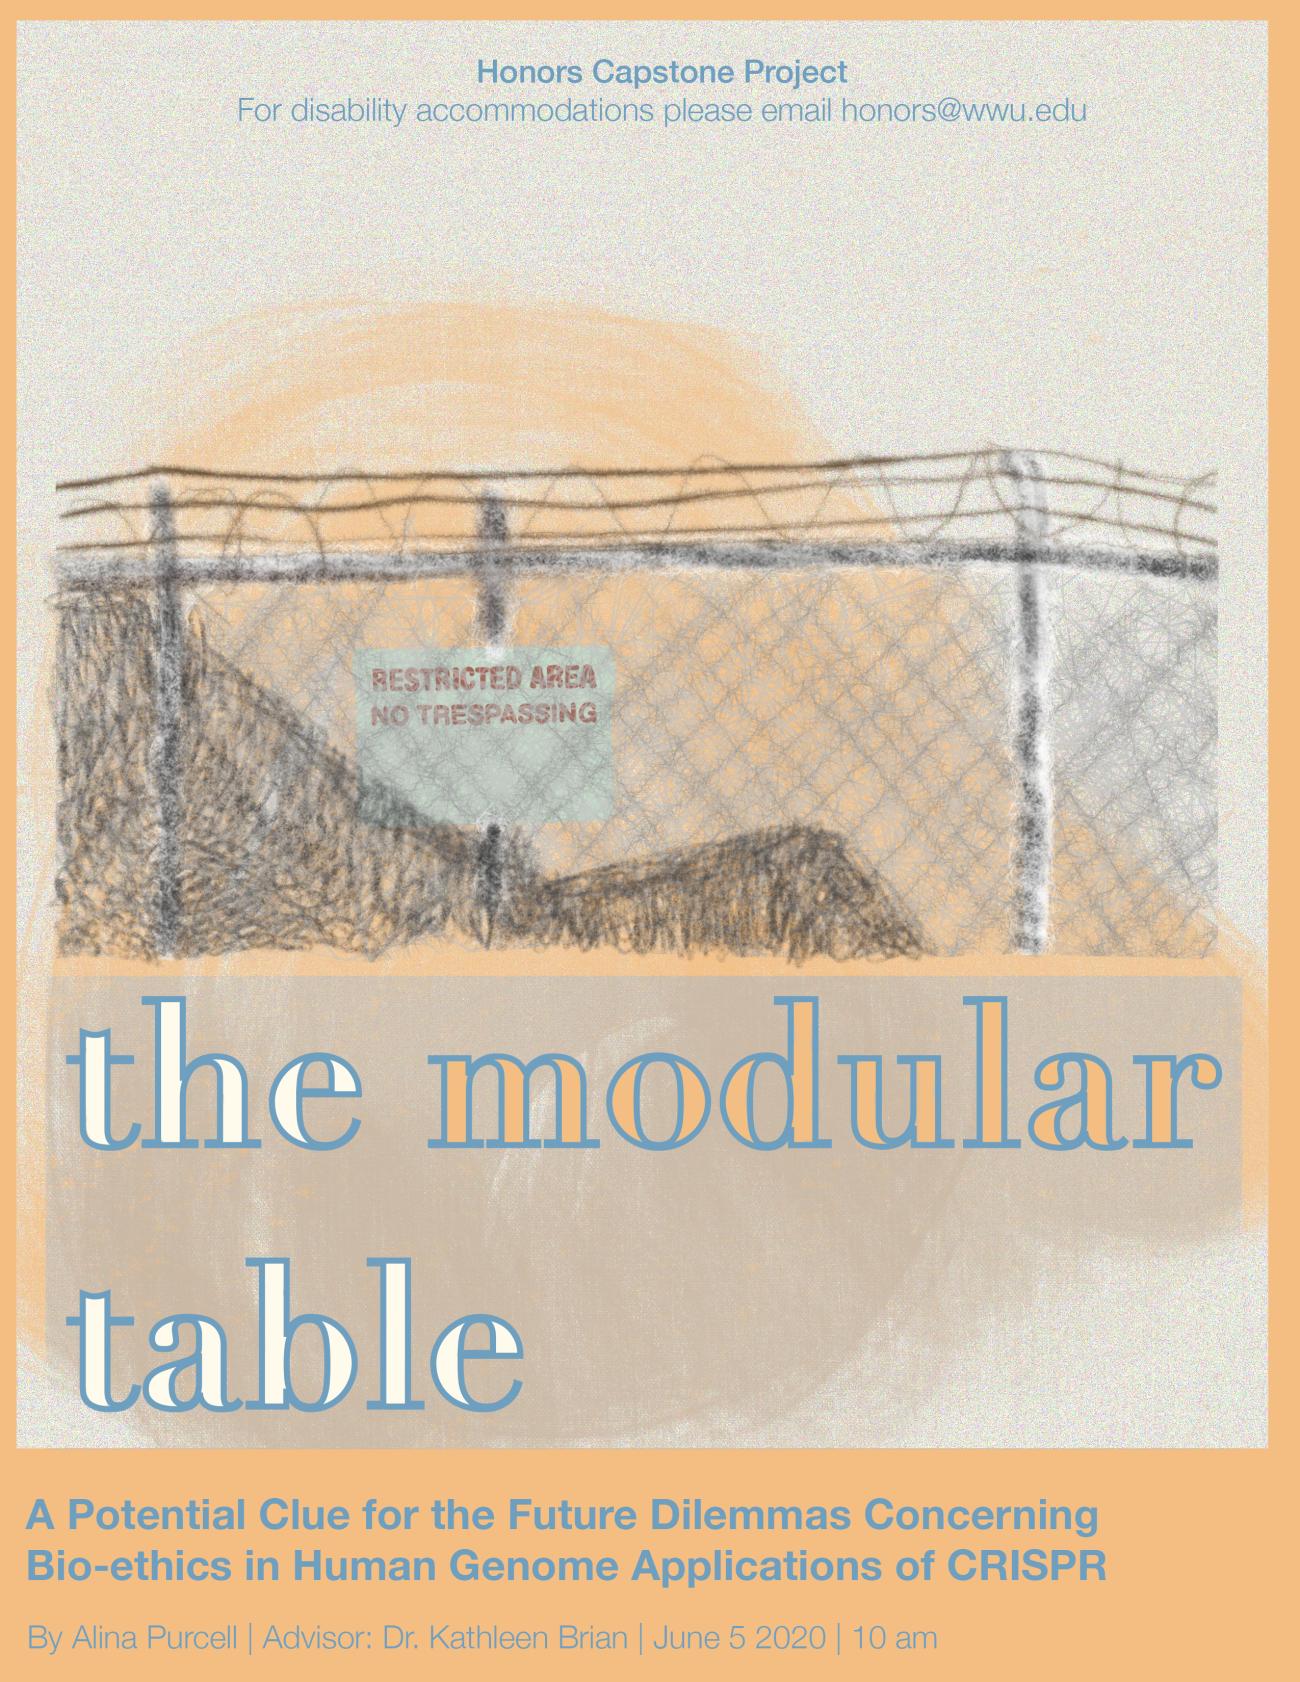 Text: "The Modular Table: A Potential Clue for the Future Dilemmas Concerning Bioethics in Human Genome Applications of CRISPR." "By Alina Purcell, Advisor: Dr. Kathleen Brian, June 5 2020 10 am." "Honors Capstone Project, for disability accommodations please email honors@wwu.edu." Image: a digital drawing of a fence with barbed wire, and some shadows behind it. The sign on the fence reads: "Restricted area, no trespassing" in all caps and in red.